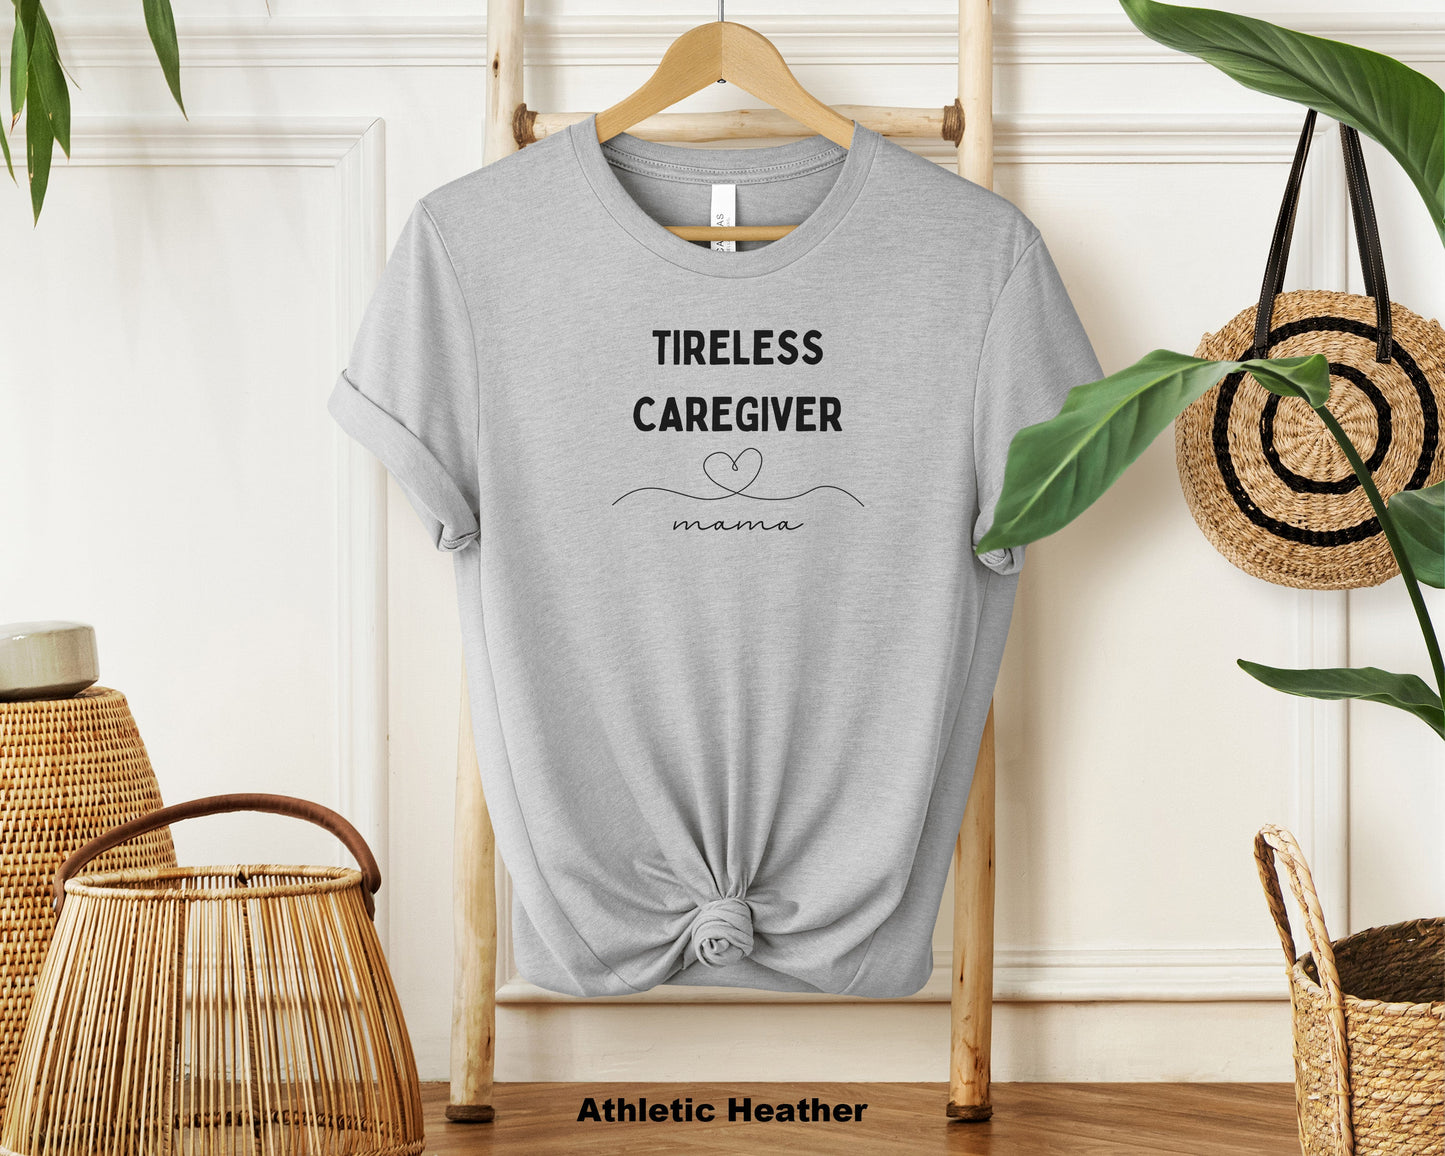 "Tireless Caregiver Mom Soft Cotton Crewneck T-Shirt with Mama Heart Design - Ideal for Mothers and Expecting Moms"